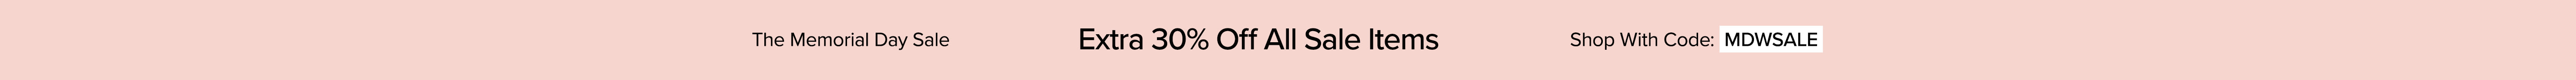 Extra 30% Off All Sale Items